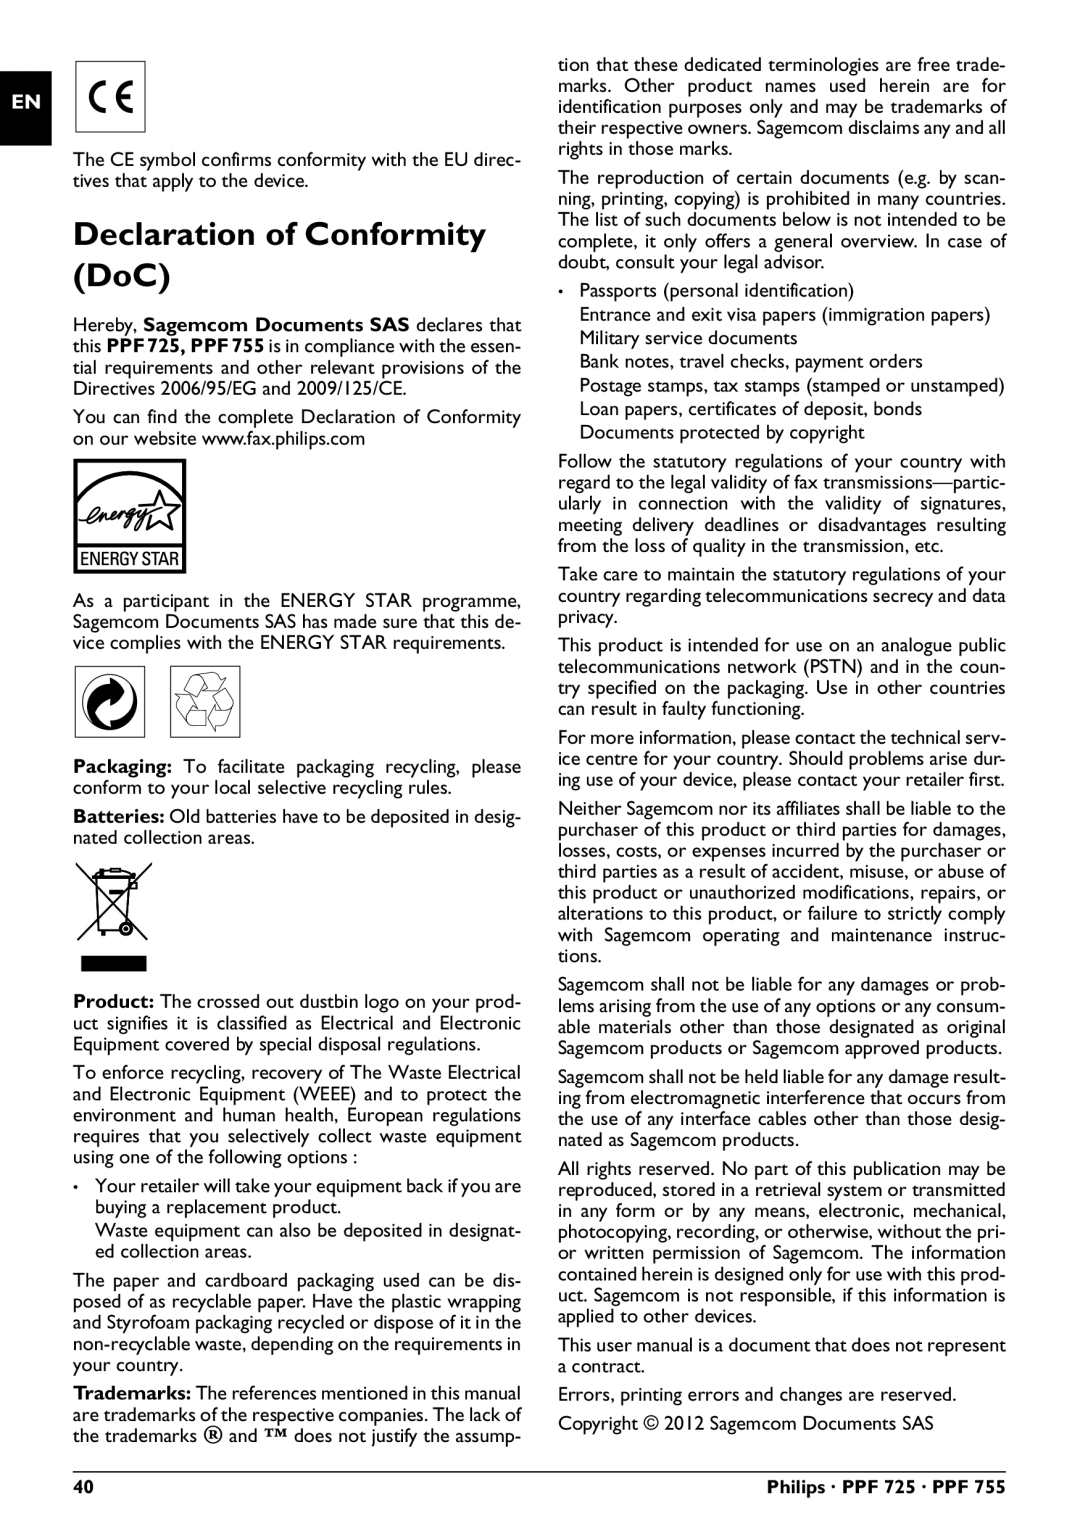 Philips PPF 755, PPF 725 user manual Declaration of Conformity DoC 